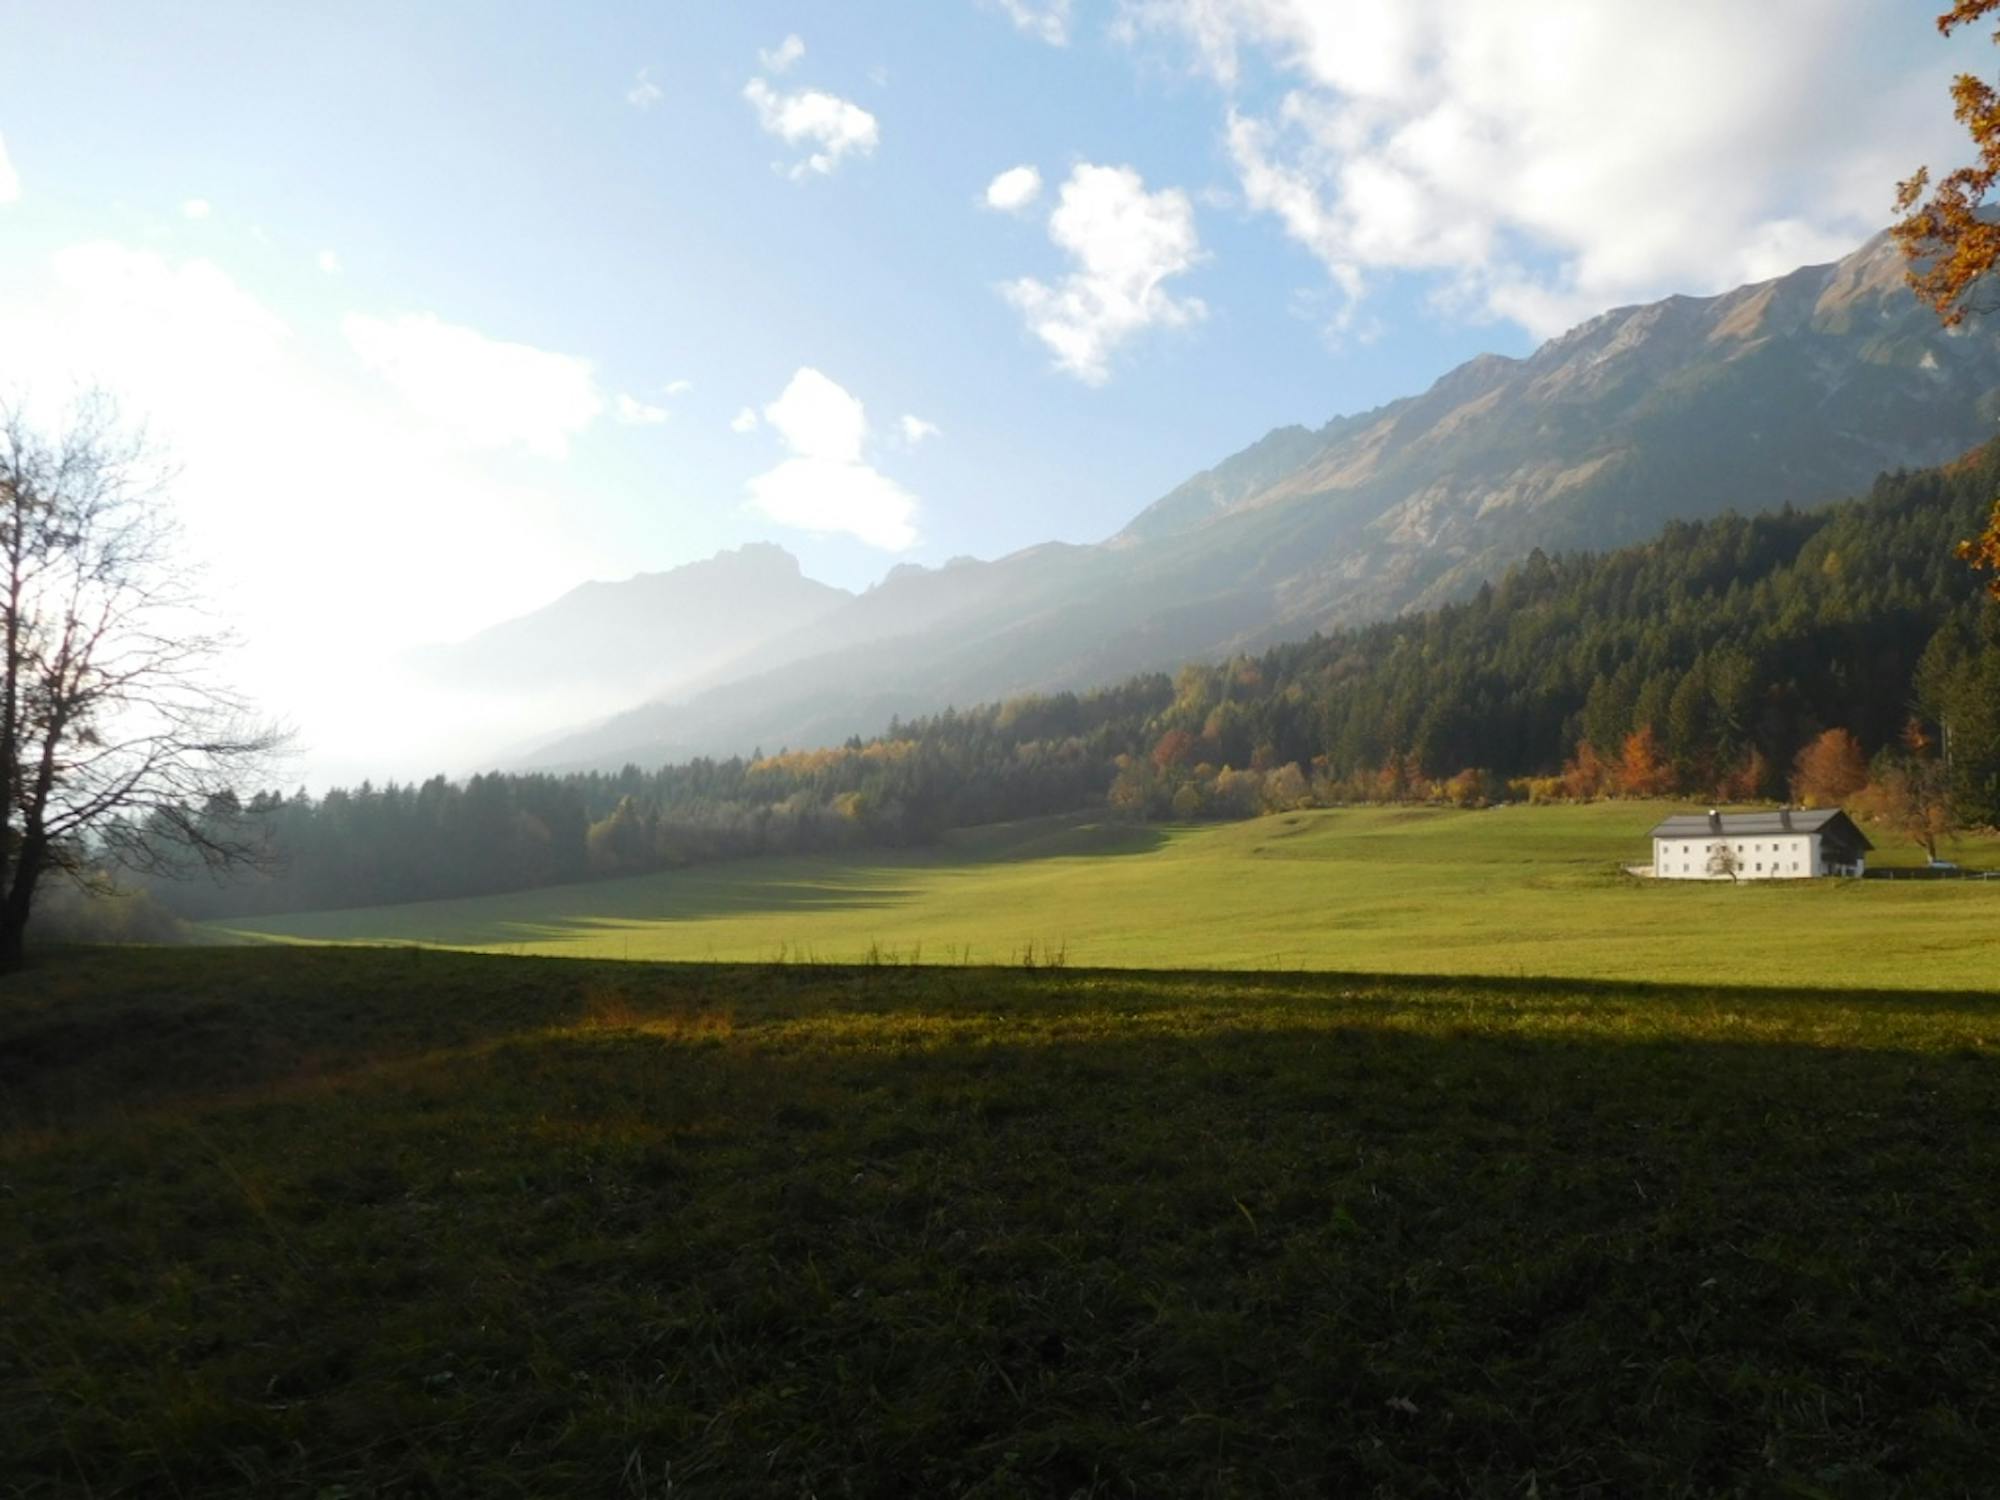 The fields just before Rechenhof as viewed from the south